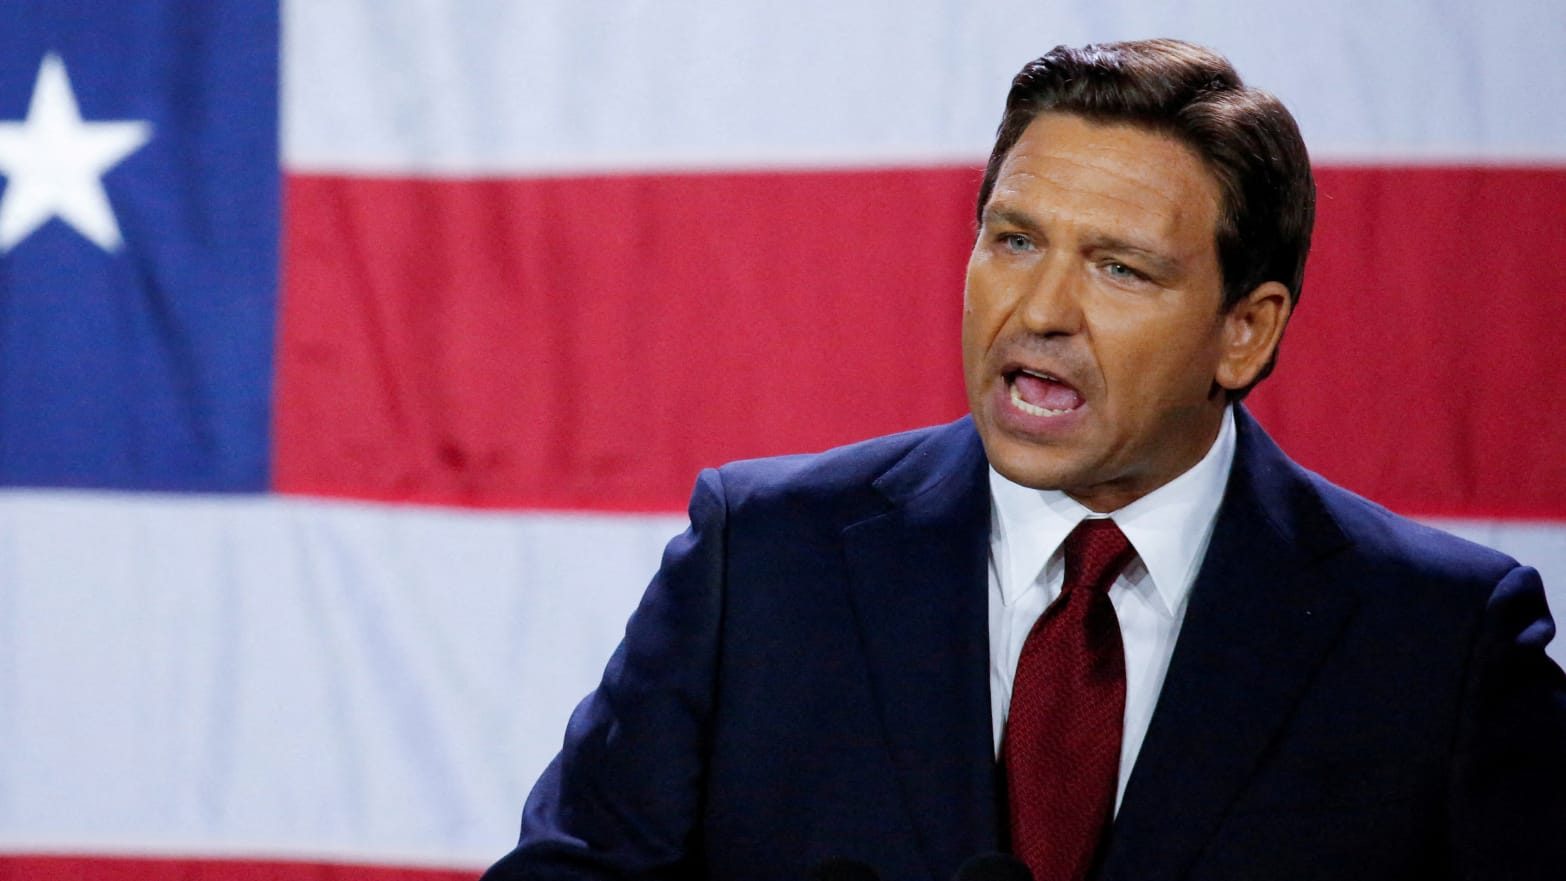 Ron DeSantis speaks passionately in front of a U.S. flag